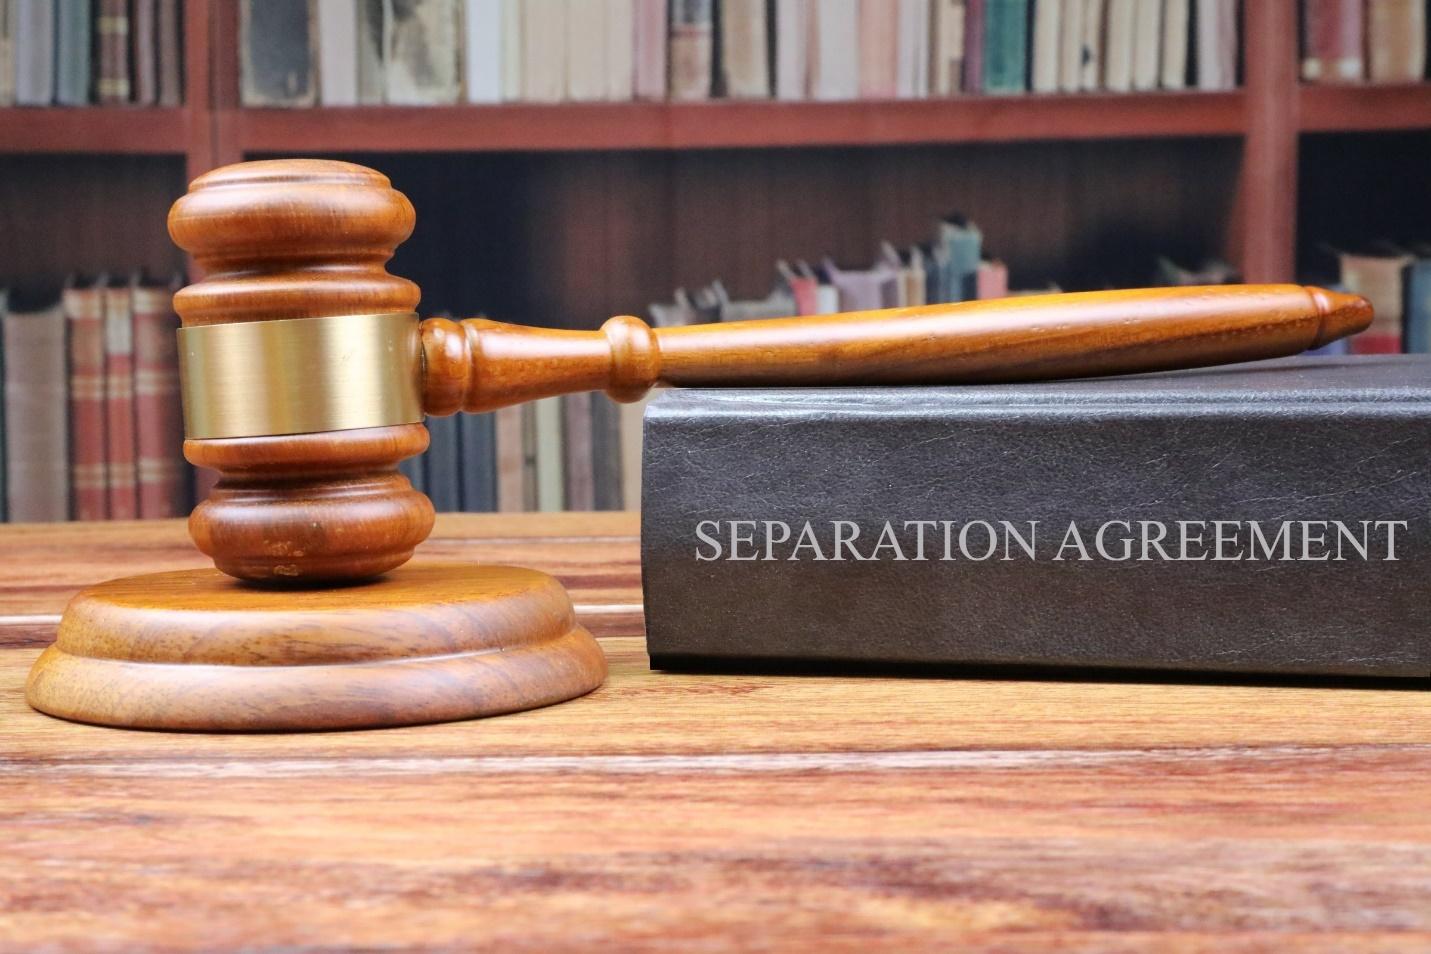 Separation Agreement - Free of Charge Creative Commons Legal 9 image